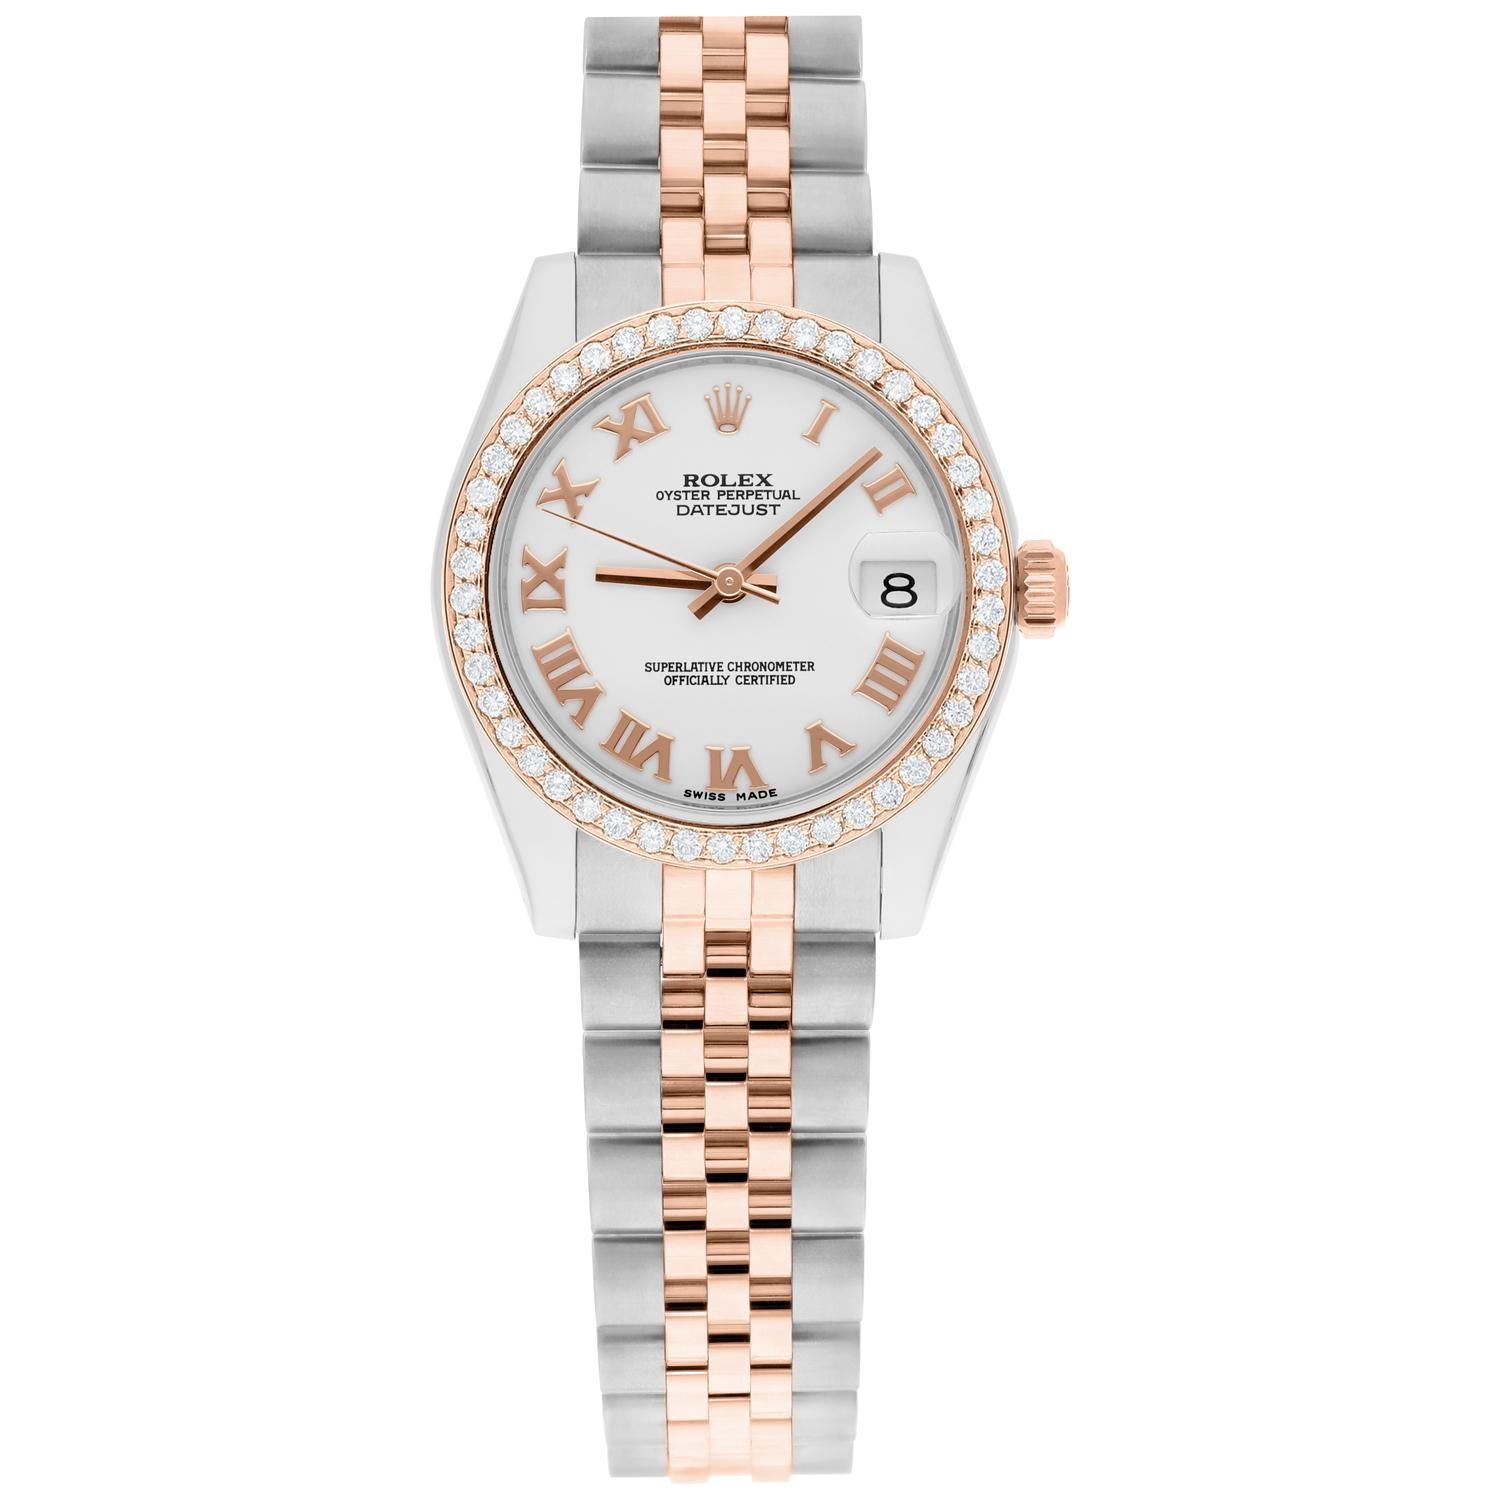 Rolex Datejust 31mm 18k Rose Gold/Steel Watch White Roman Dial Custom Diamond Bezel 178271


This watch has been professionally polished, serviced and is in excellent overall condition. Diamonds are 100% natural, bezel 18K gold plated. There are